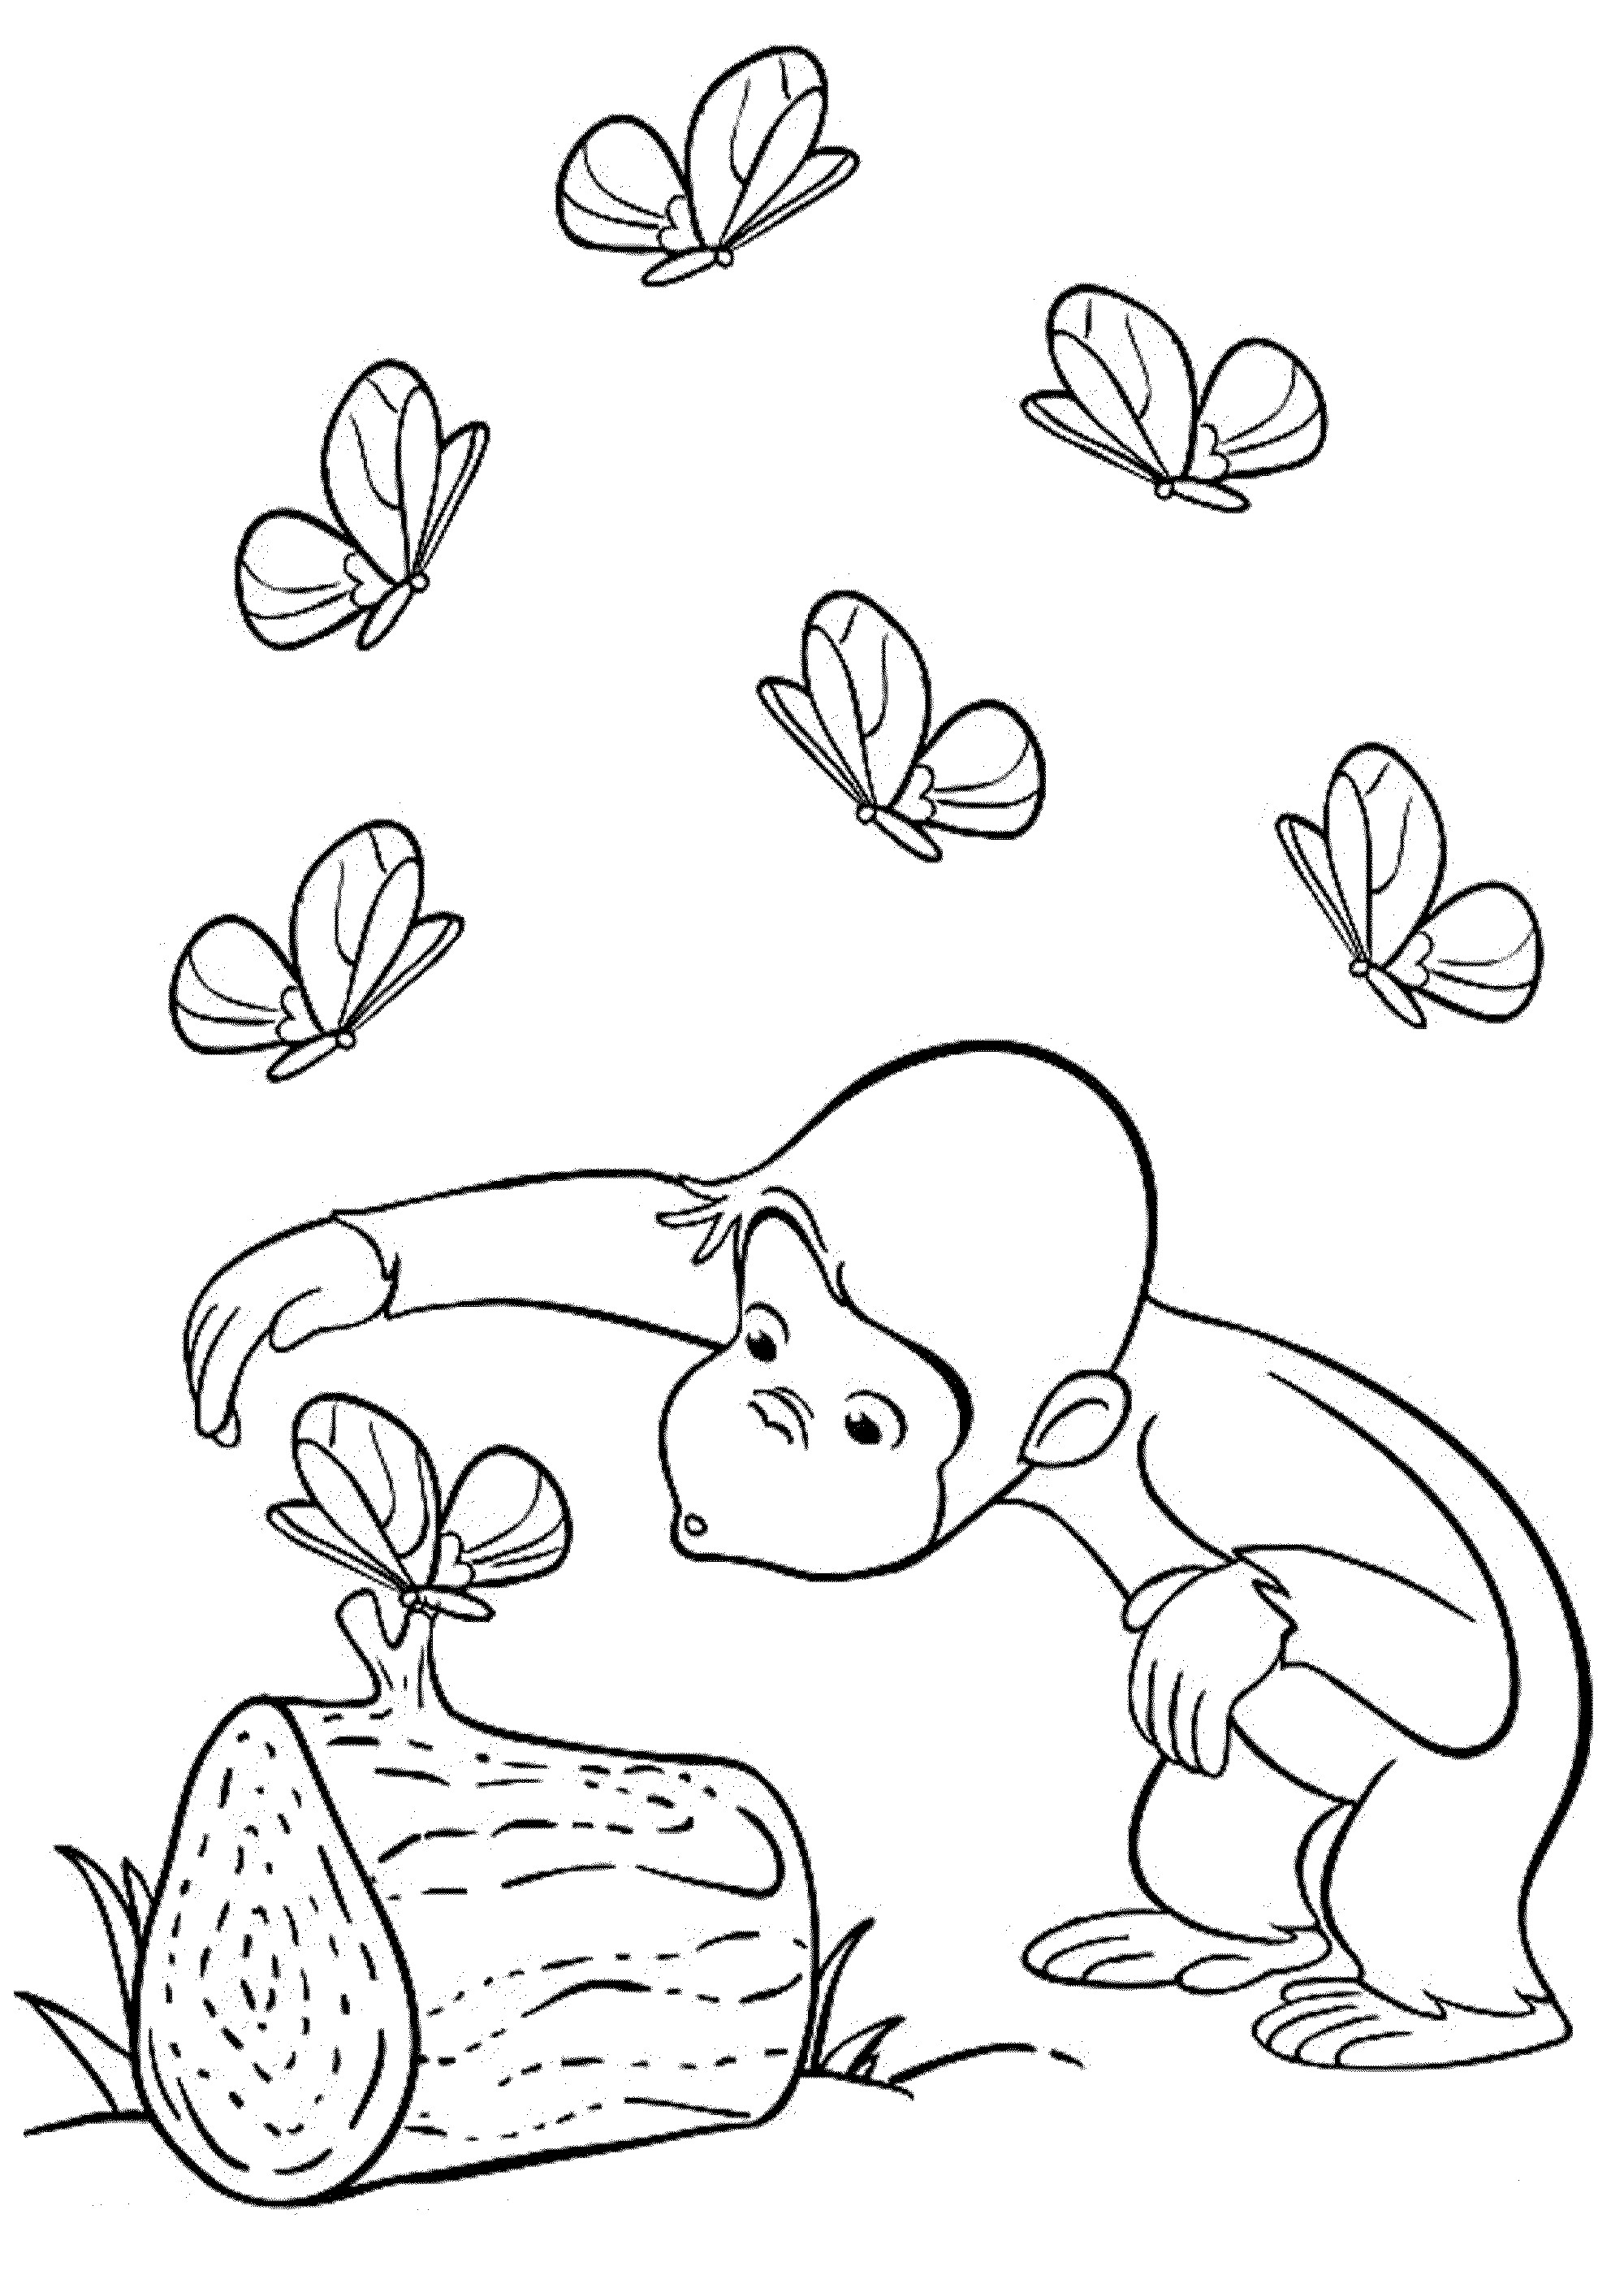 Curious Gorge Coloring Pages
 Curious George Coloring Pages Best Coloring Pages For Kids